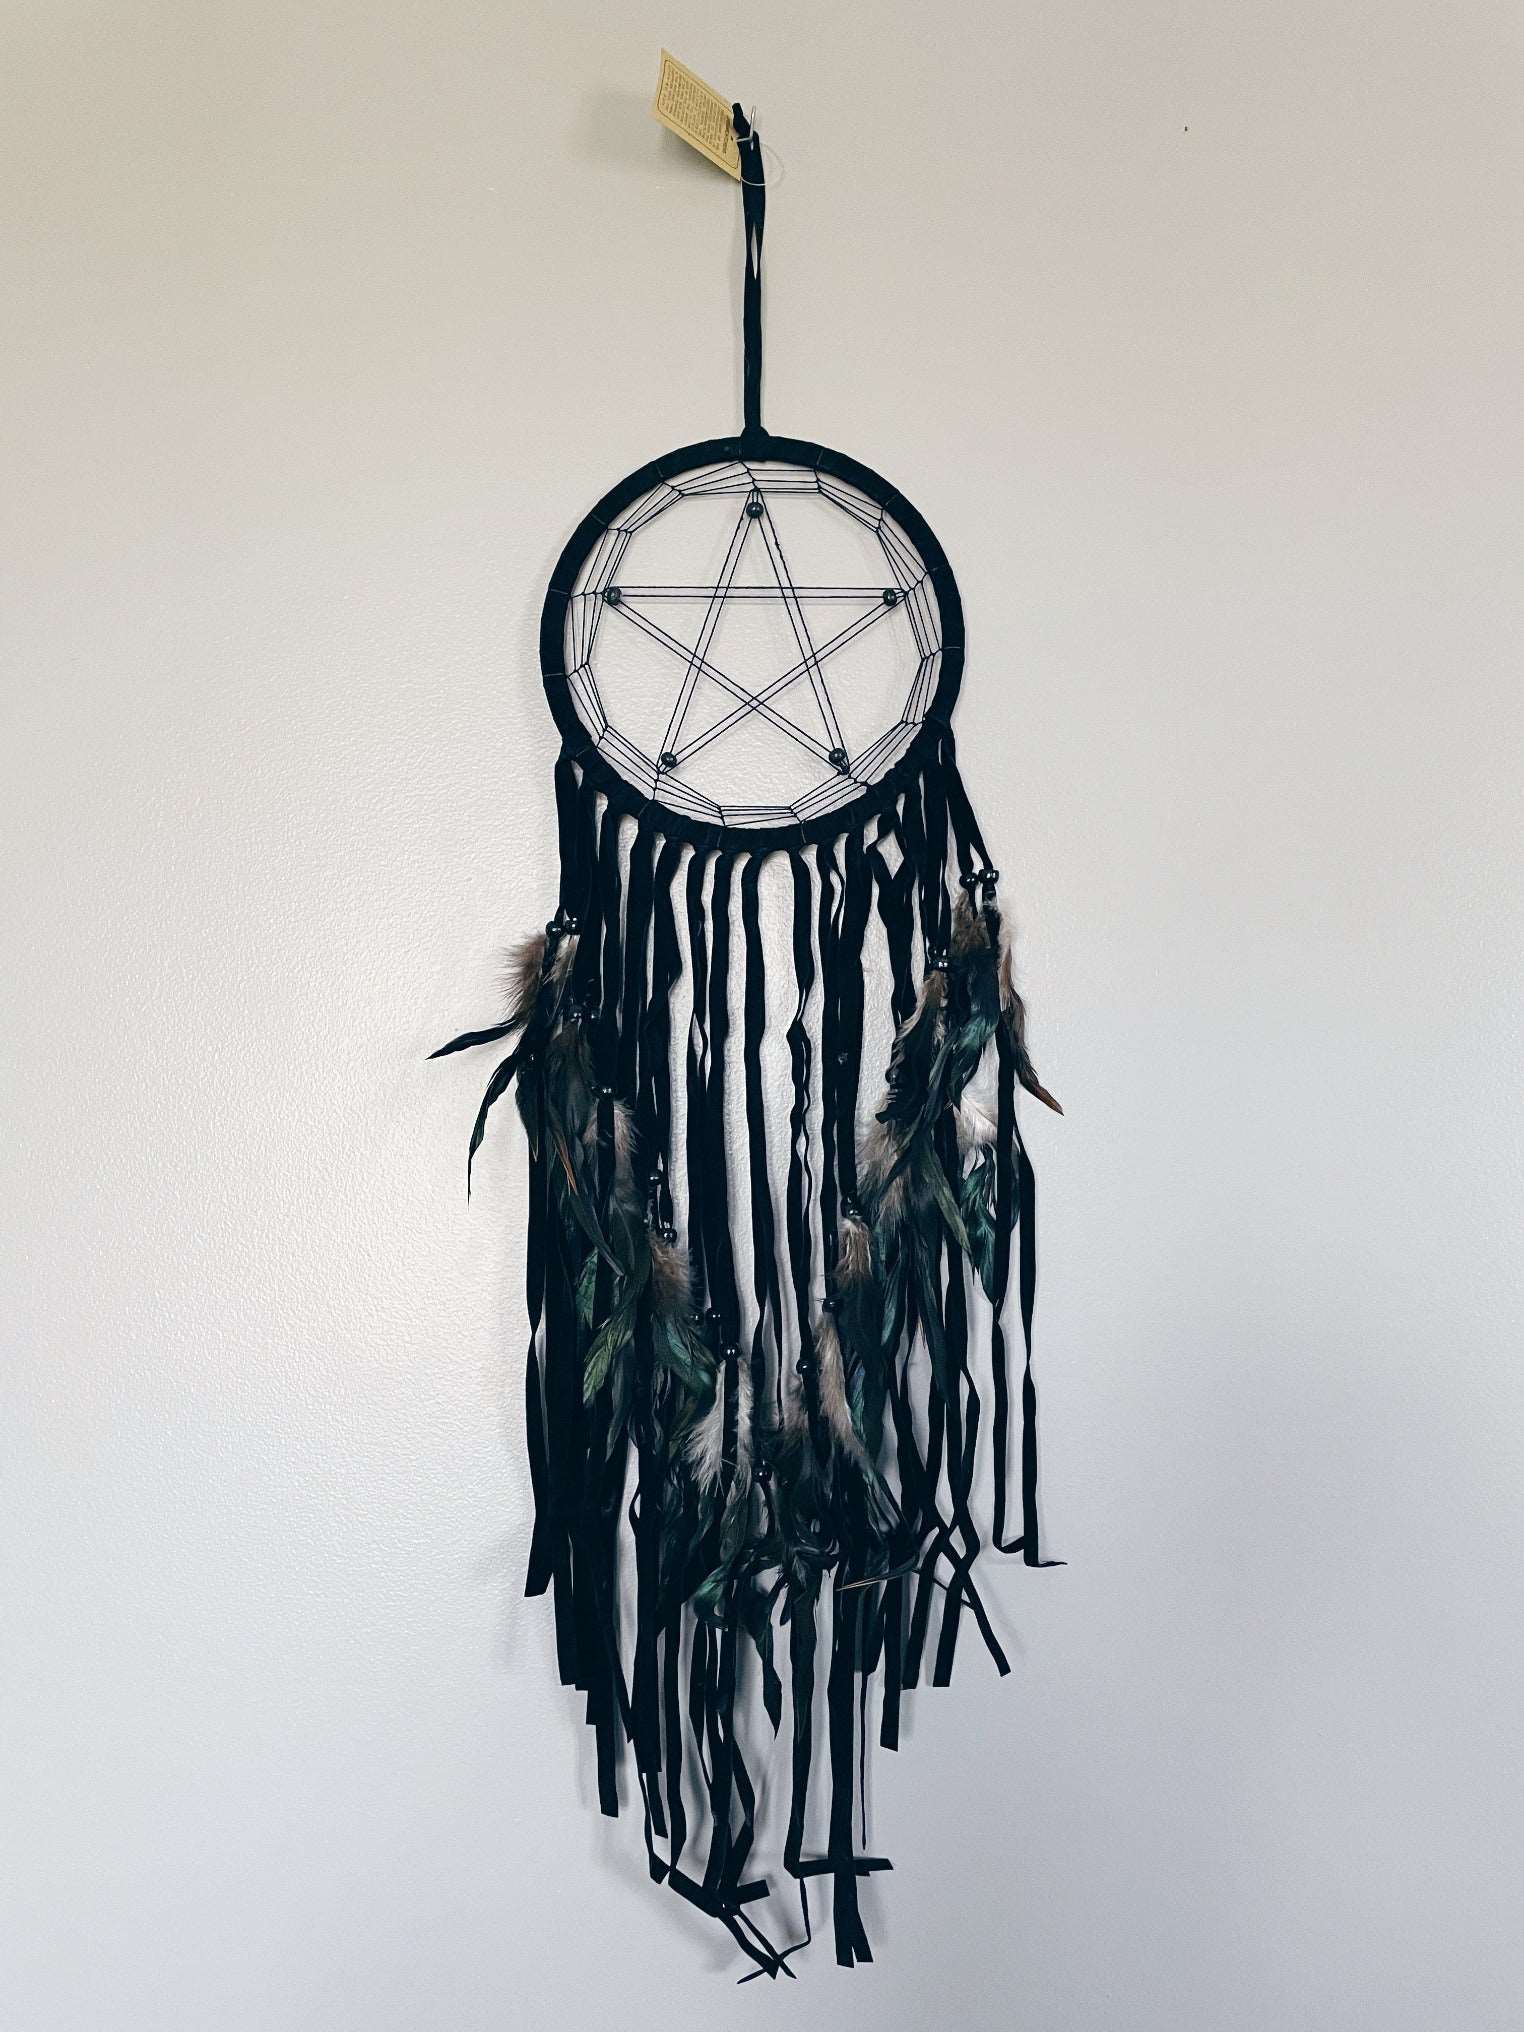 Pictured is a dreamcatcher with a pentagram in the middle.